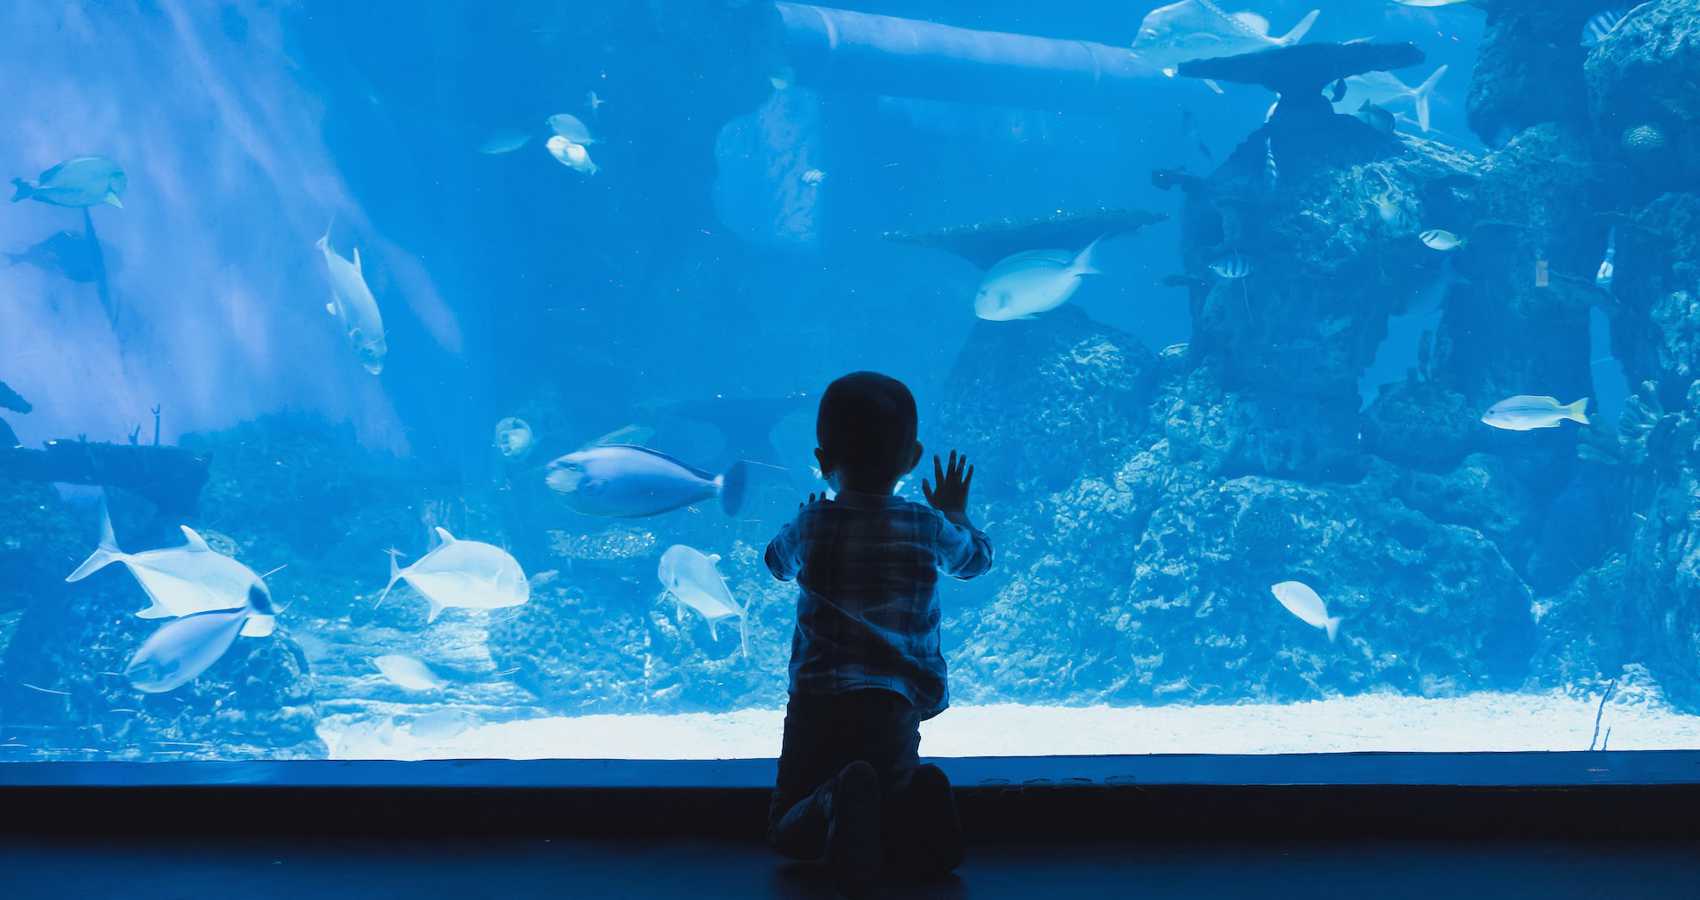 Finding Joy at The Aquarium, poetry by Peggy Gerber at Spillwords.com